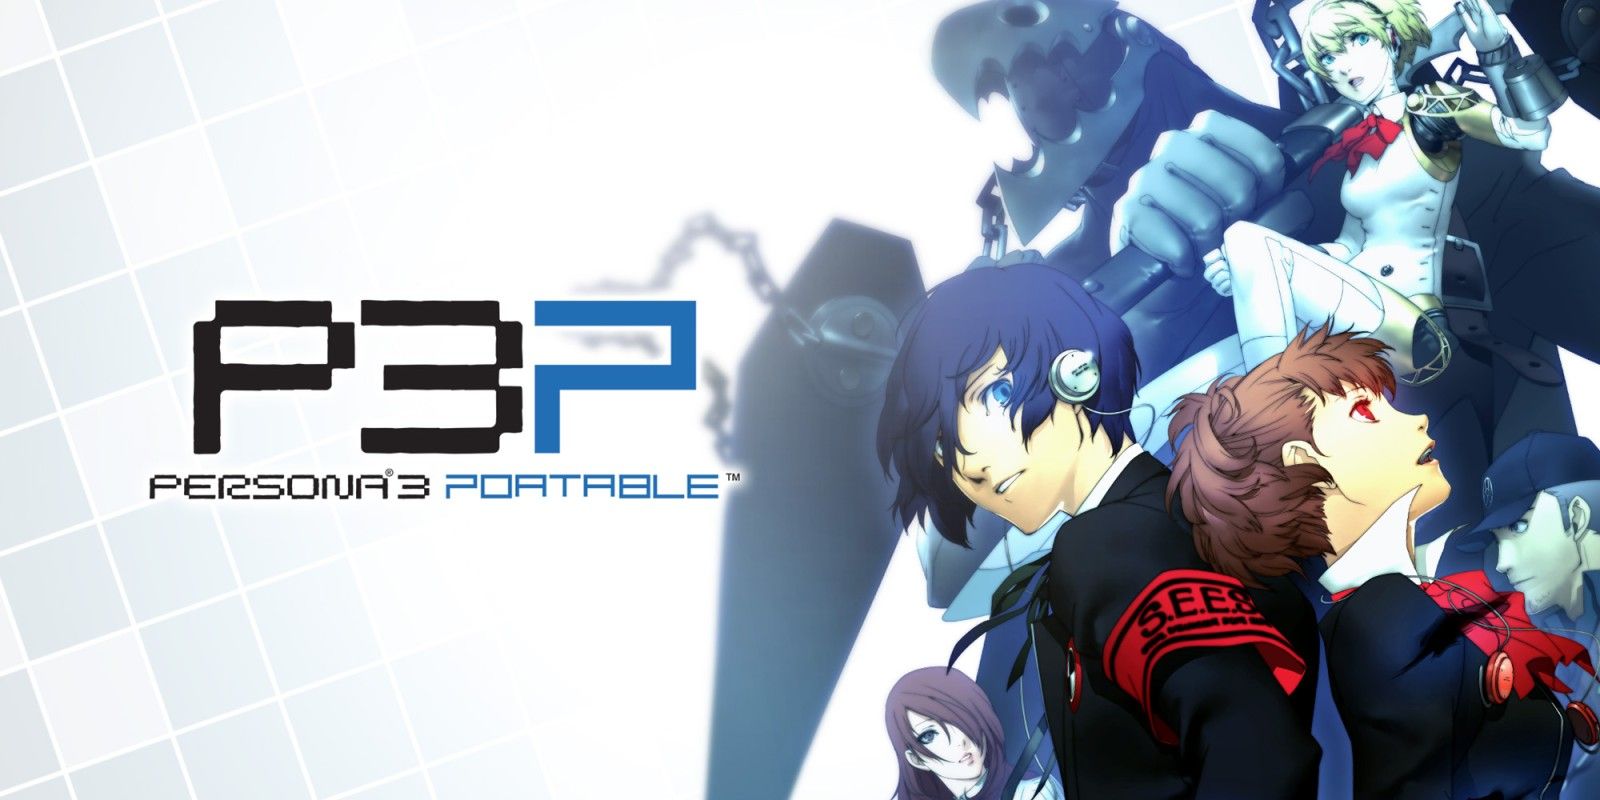 An image of promotional art for Persona 3 Portable showing the two key members of the SEES